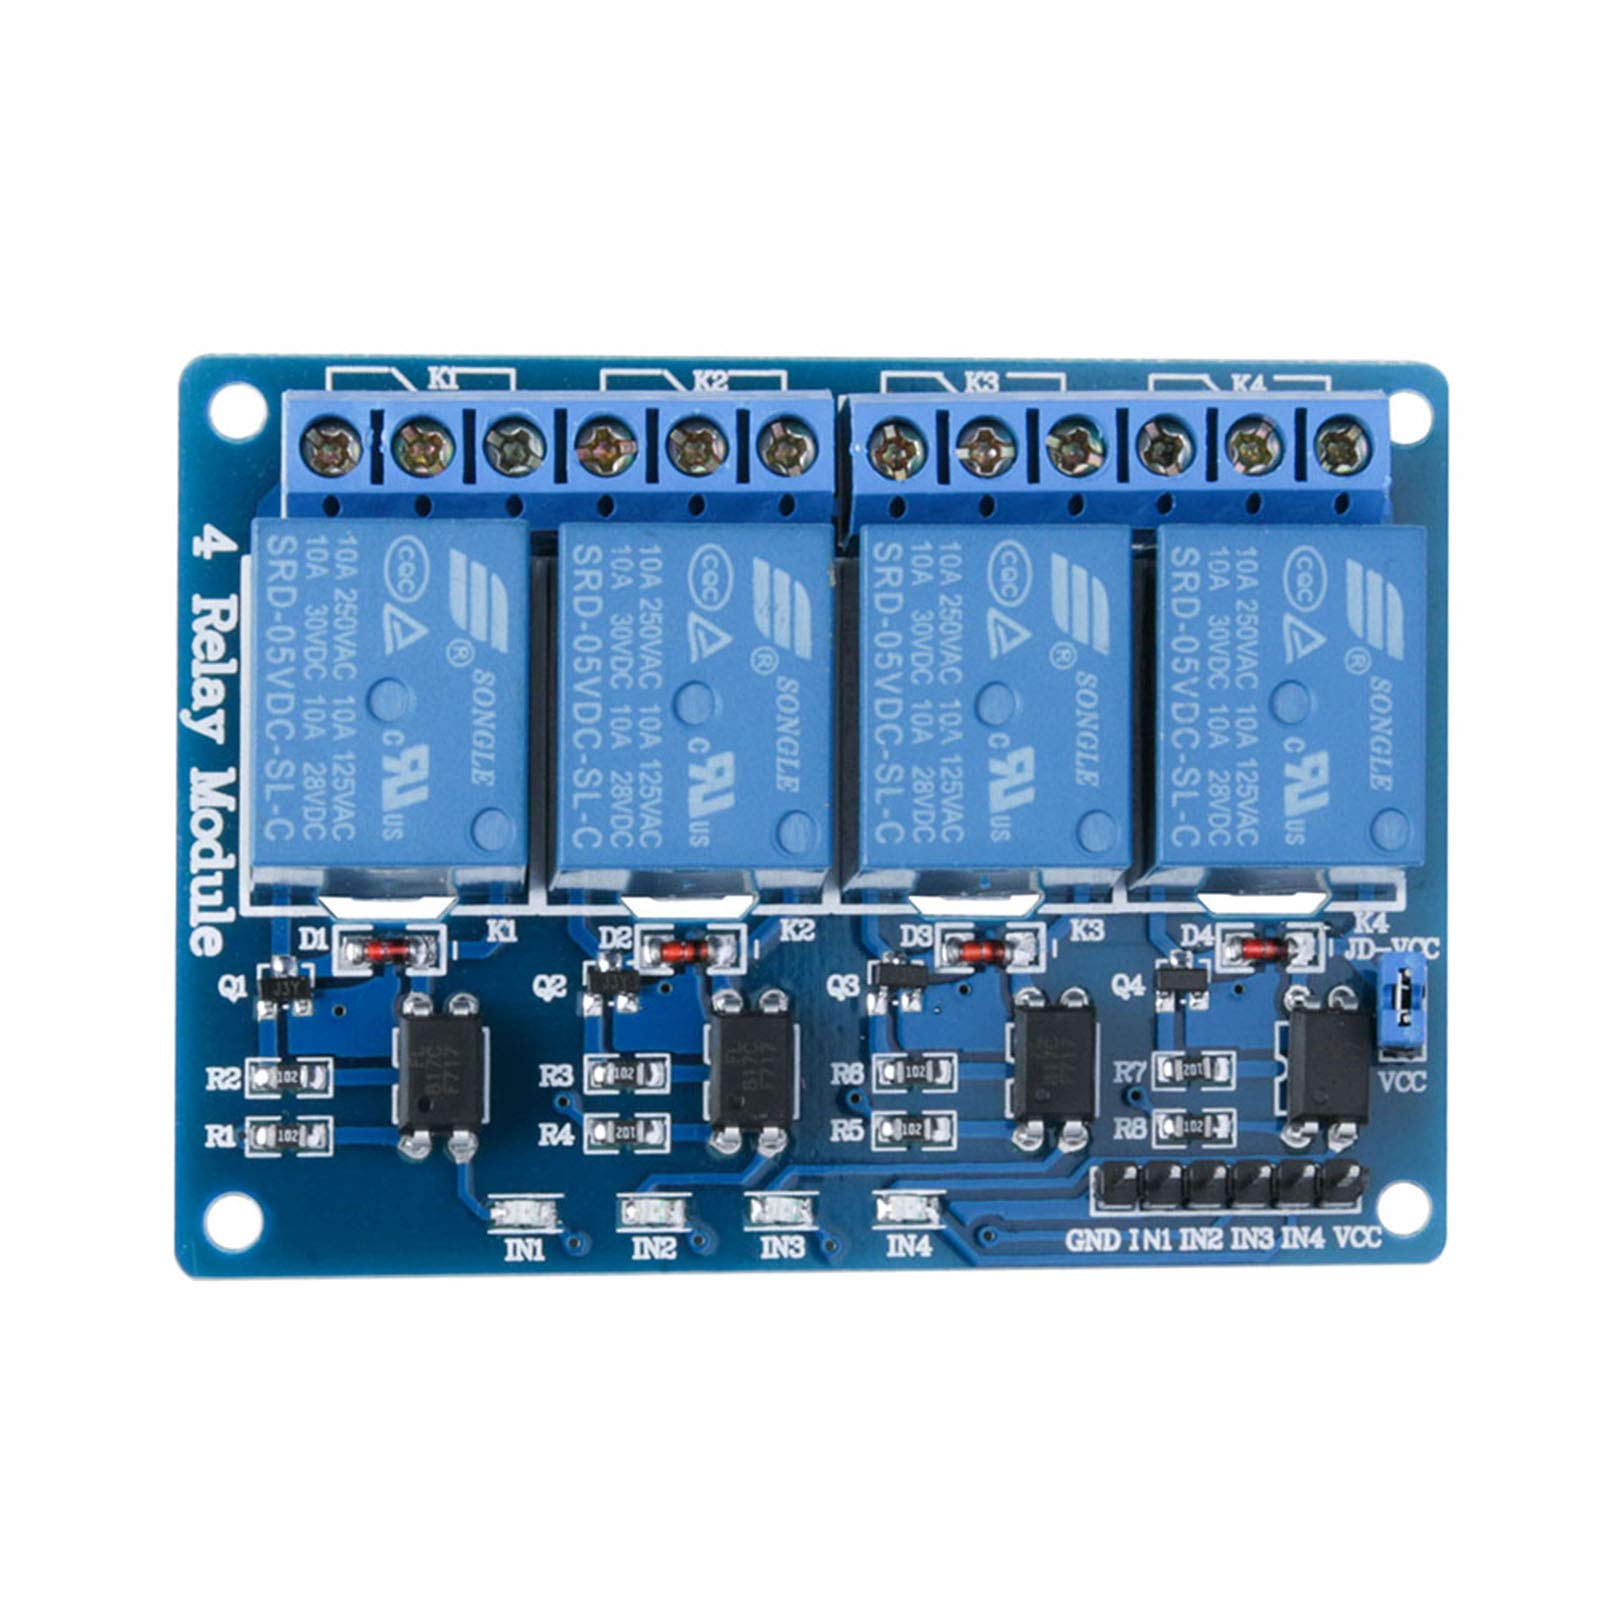 Relay Module 4 Channel 5V for Arduino UNO R3 MEGA 2560 DSP ARM PIC AVR STM32 Raspberry Pi